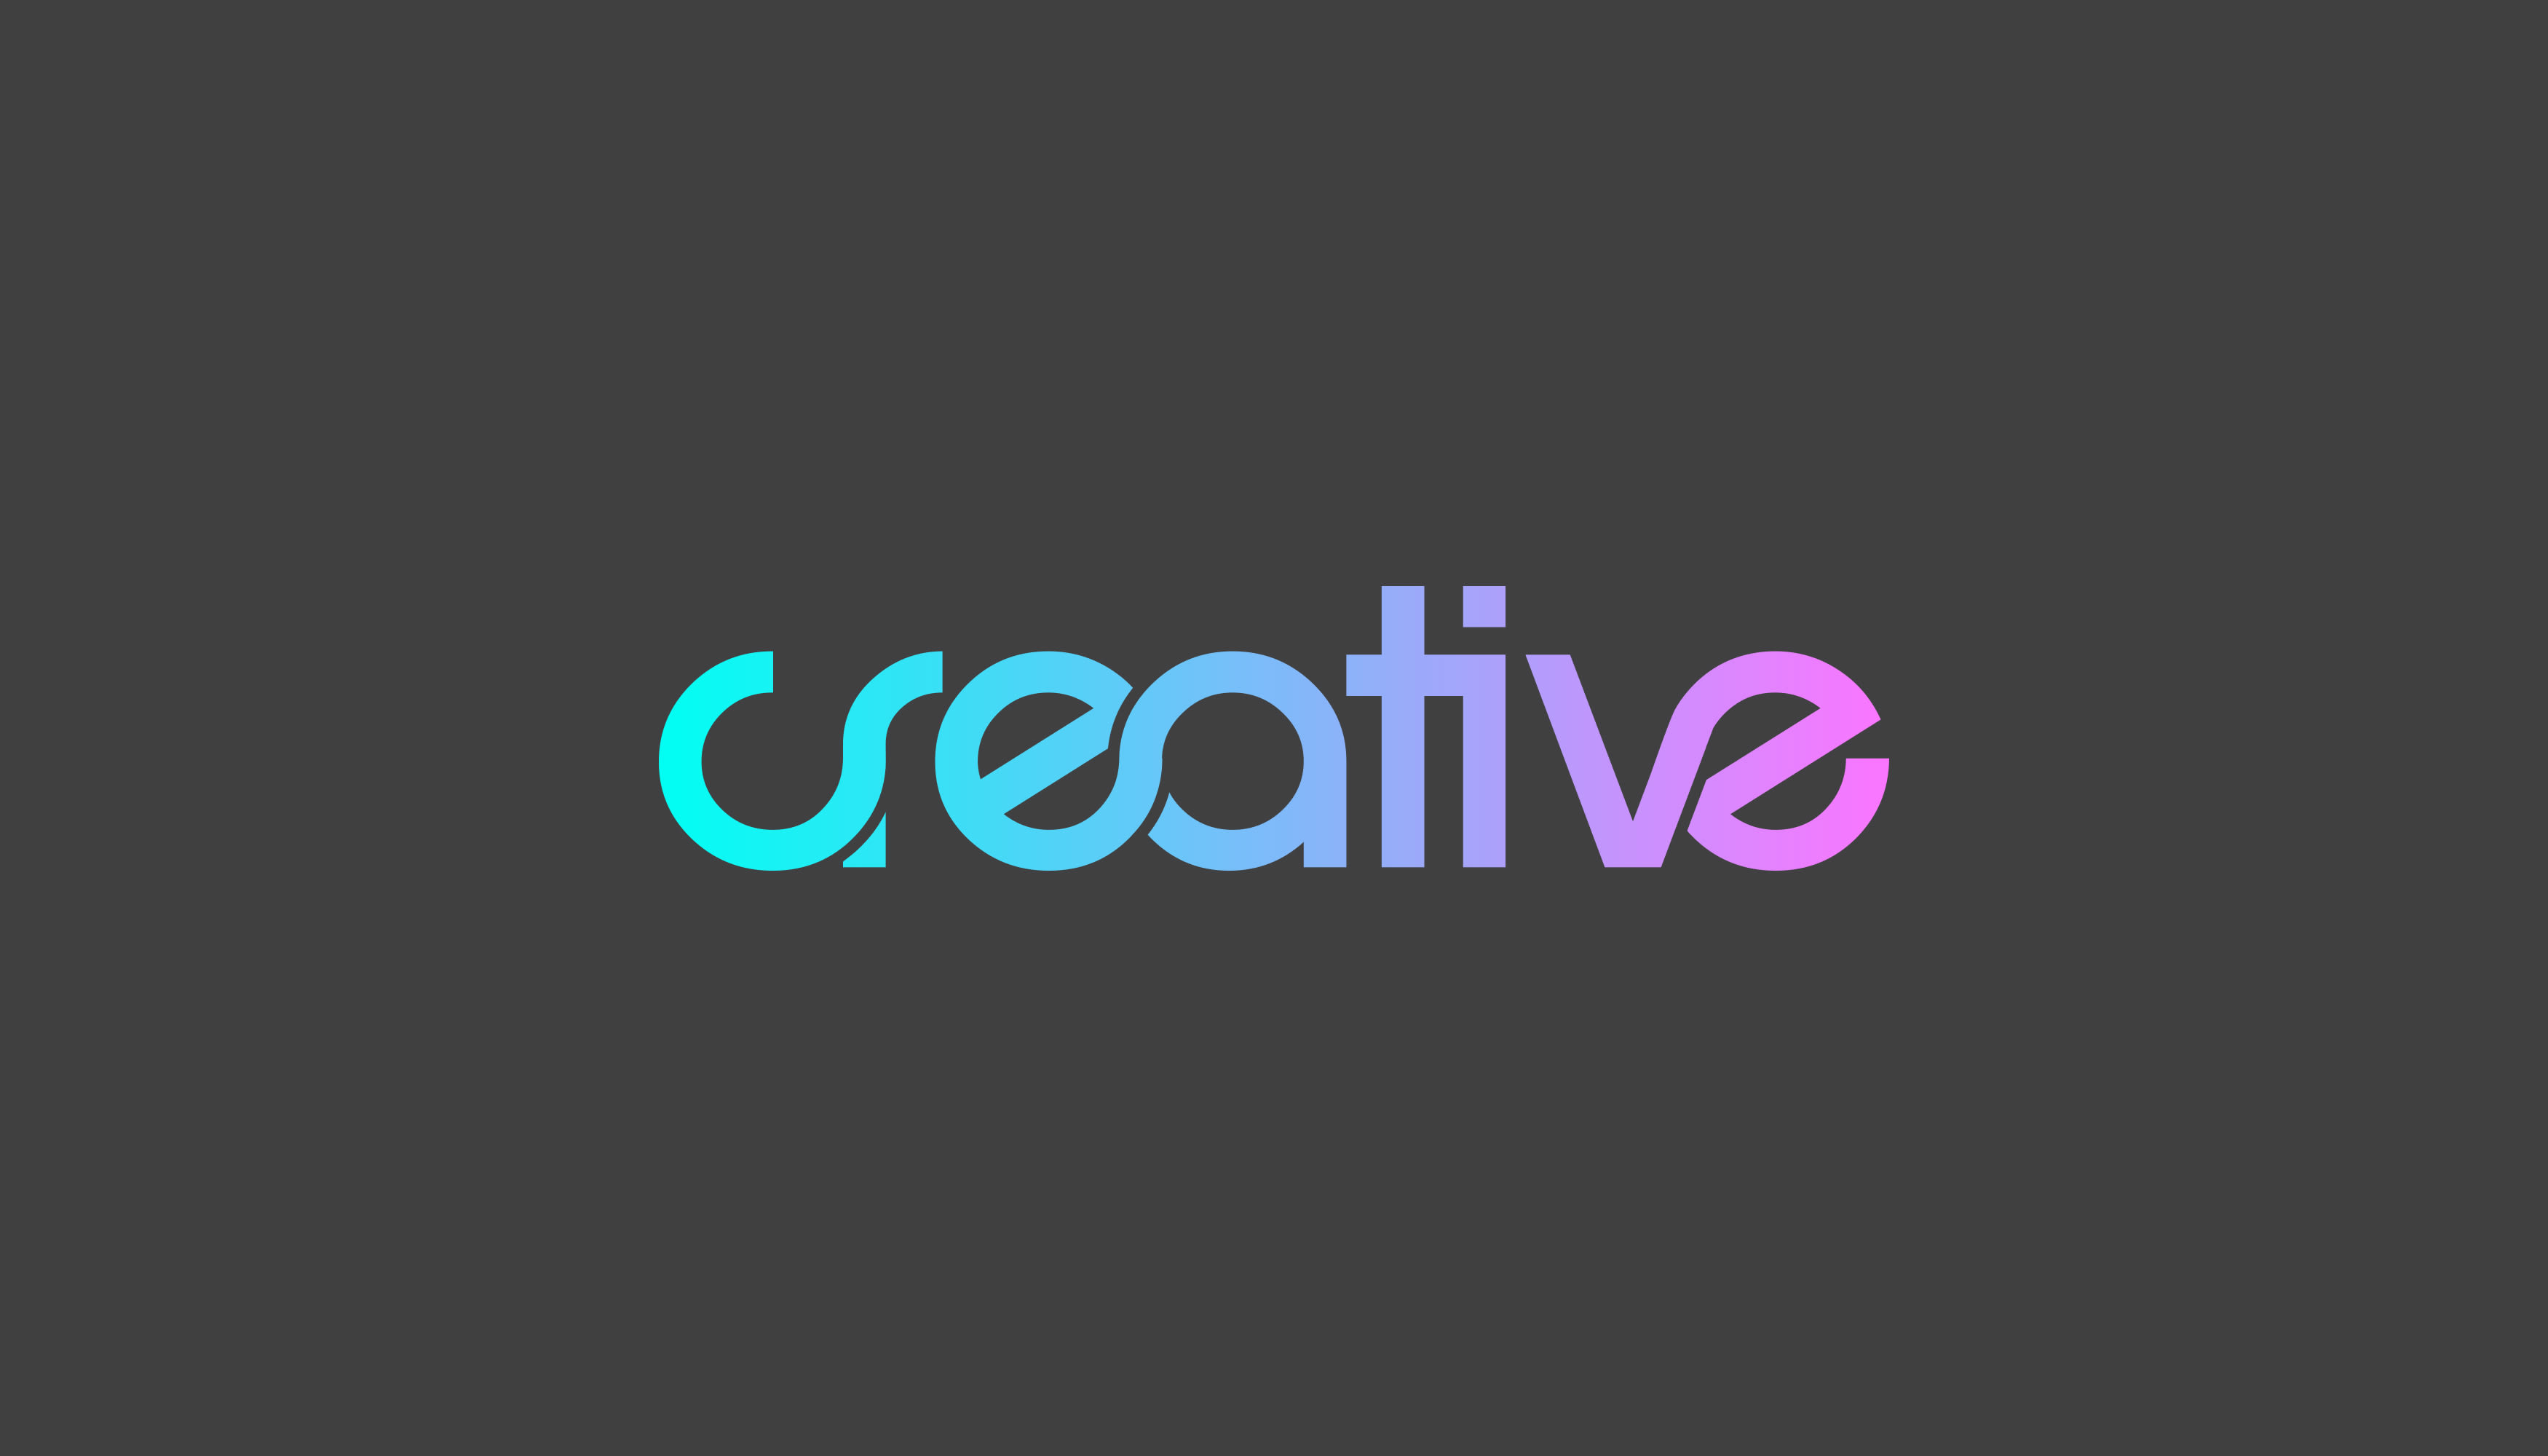 I will design a creative connected text logo  24hrs for 50 